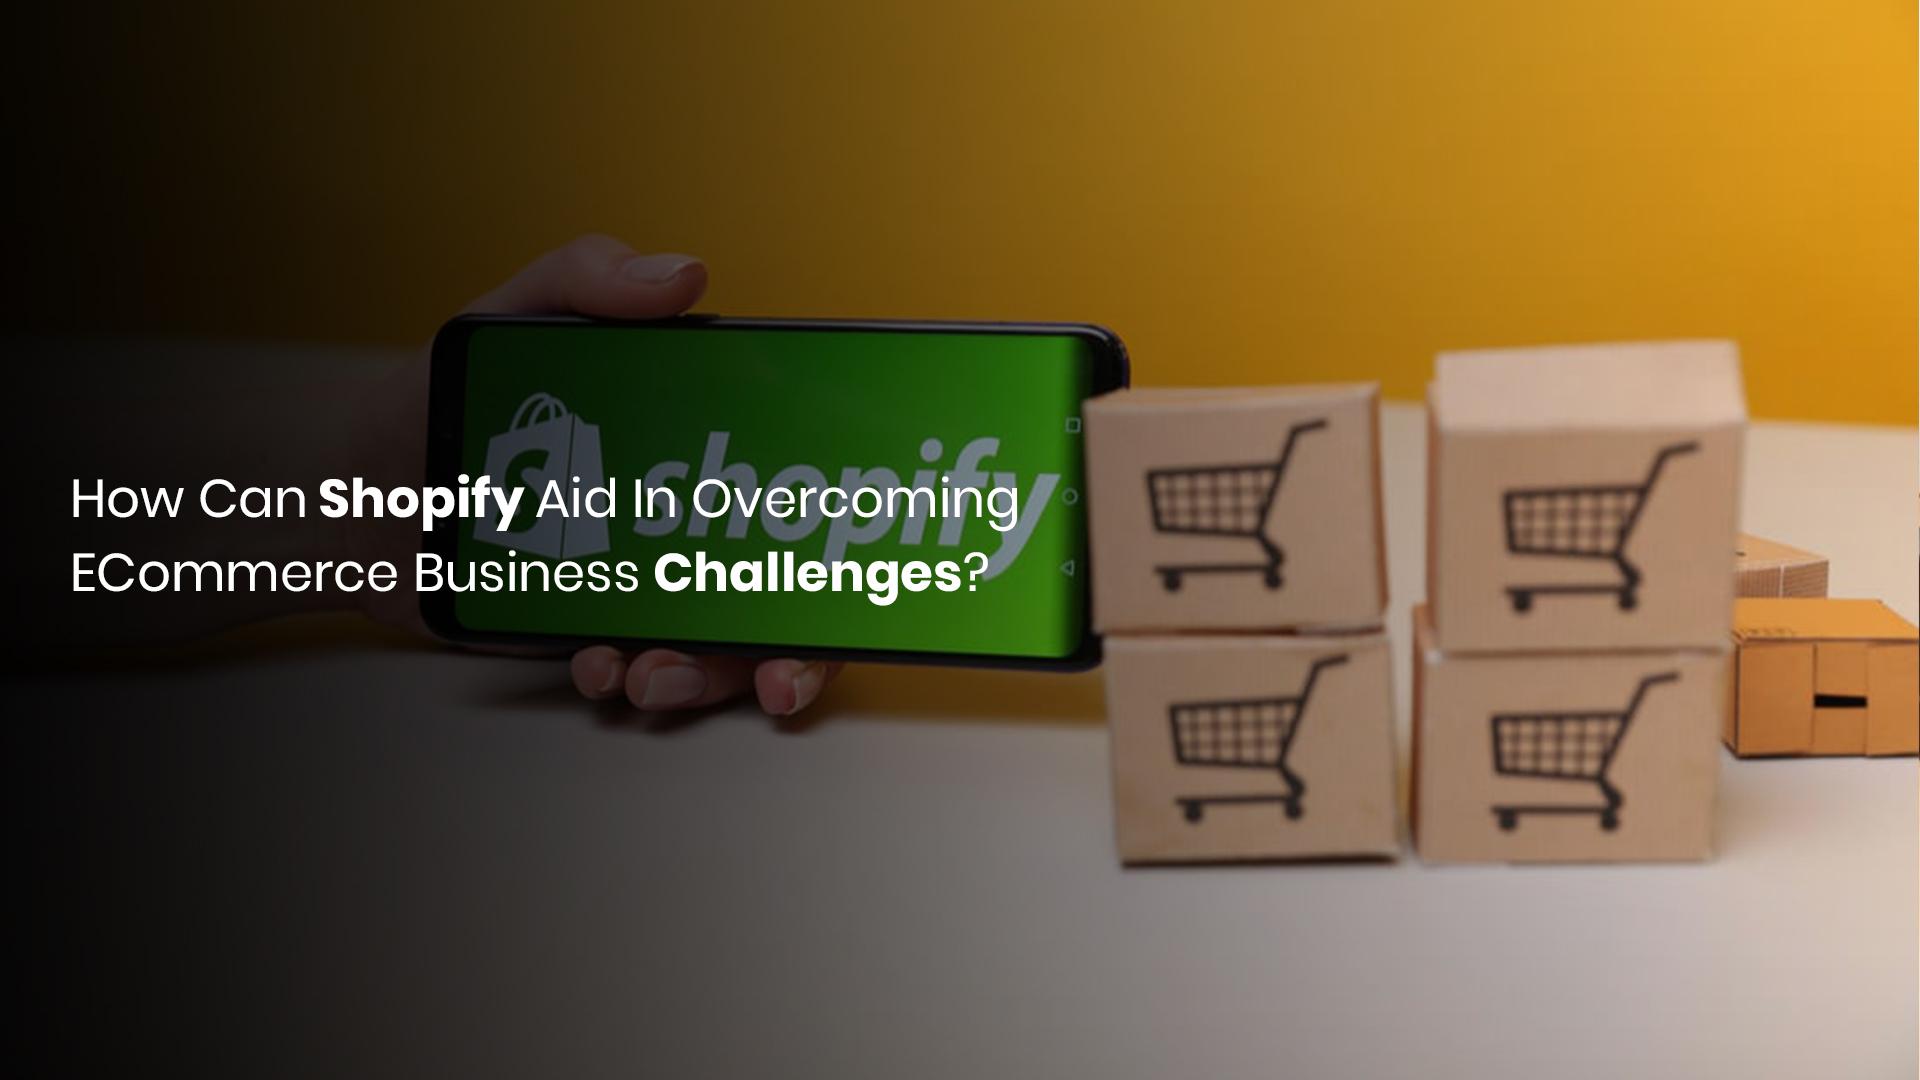 Shopify Can Help Overcome Ecommerce Business Challenges